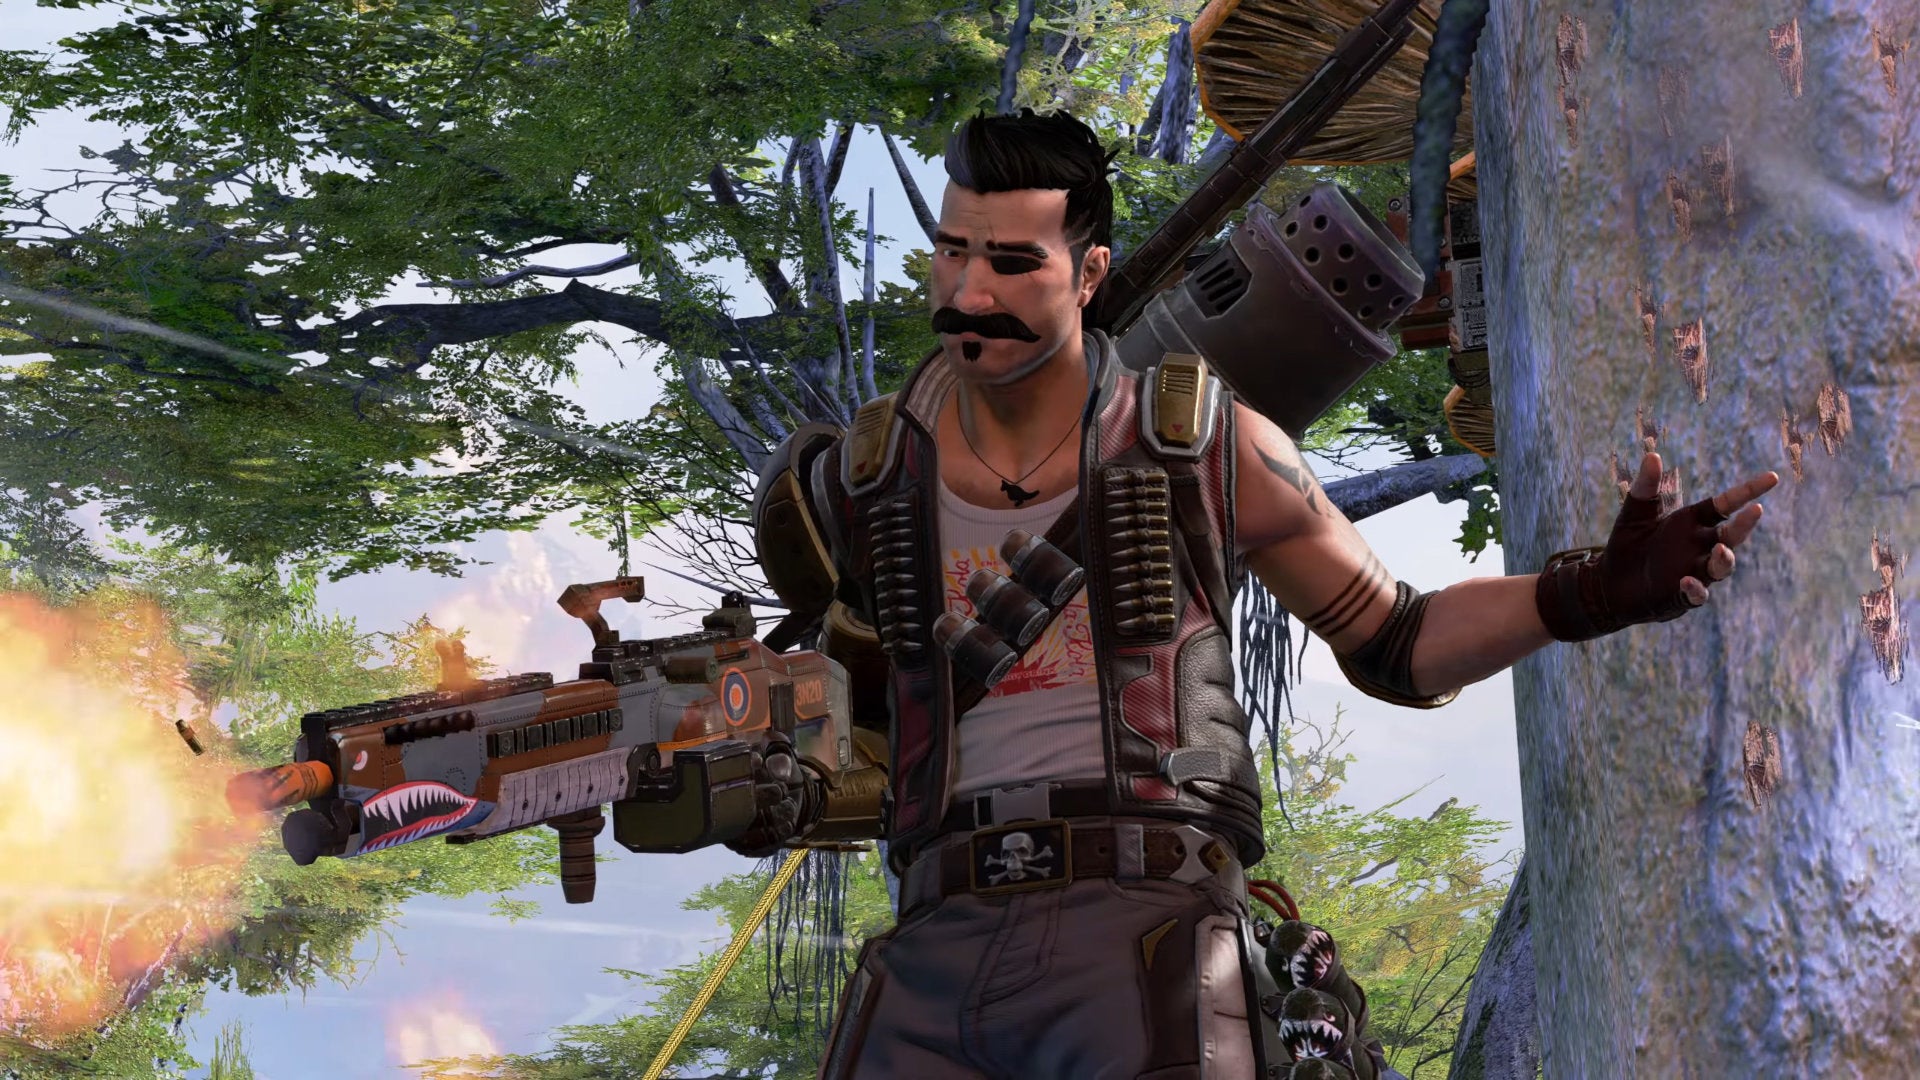 An Apex Legends screenshot of Fuse standing on the branch of a tree and firing his weapon.